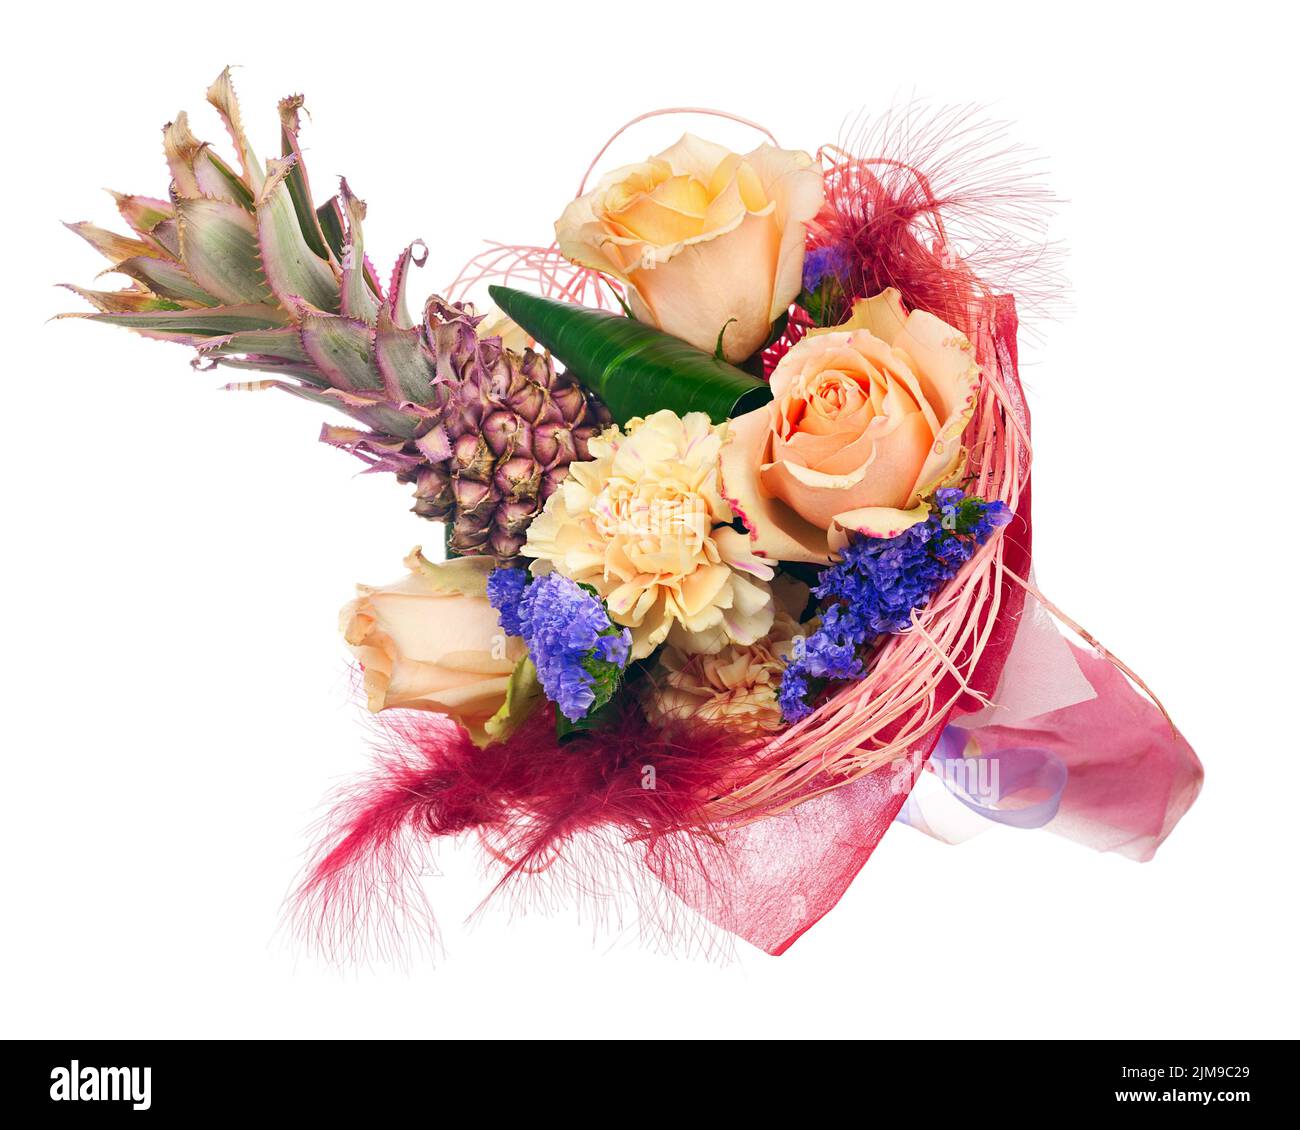 Beautiful bouquet of roses, carnations, decorative pineapple and other flowers. Stock Photo